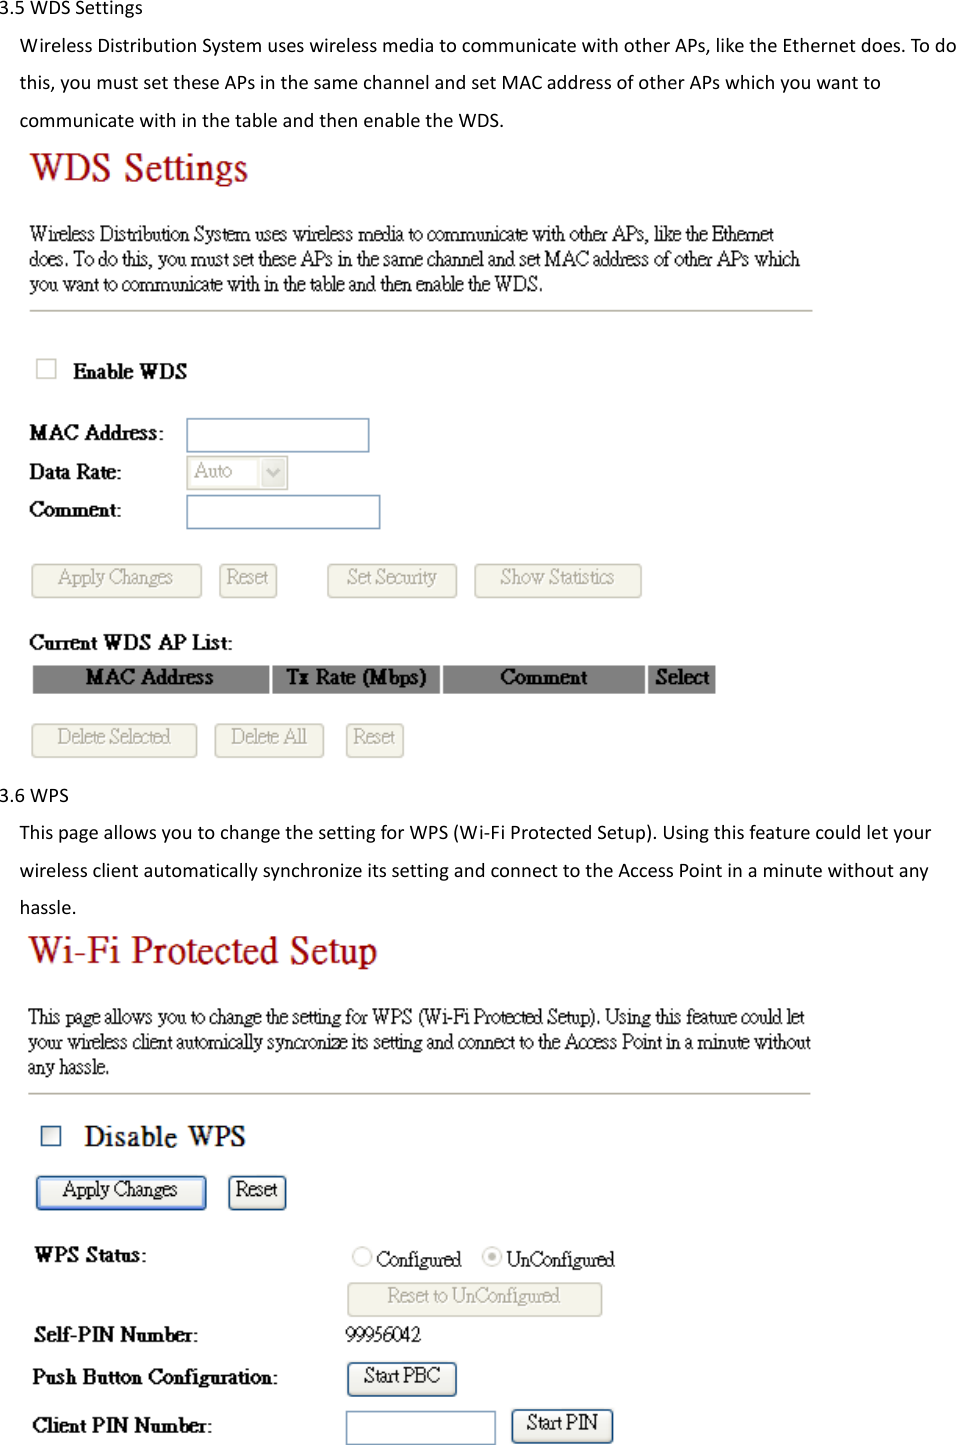     3.5 WDS Settings Wireless Distribution System uses wireless media to communicate with other APs, like the Ethernet does. To do this, you must set these APs in the same channel and set MAC address of other APs which you want to communicate with in the table and then enable the WDS.      3.6 WPS This page allows you to change the setting for WPS (Wi-Fi Protected Setup). Using this feature could let your wireless client automatically synchronize its setting and connect to the Access Point in a minute without any hassle.    